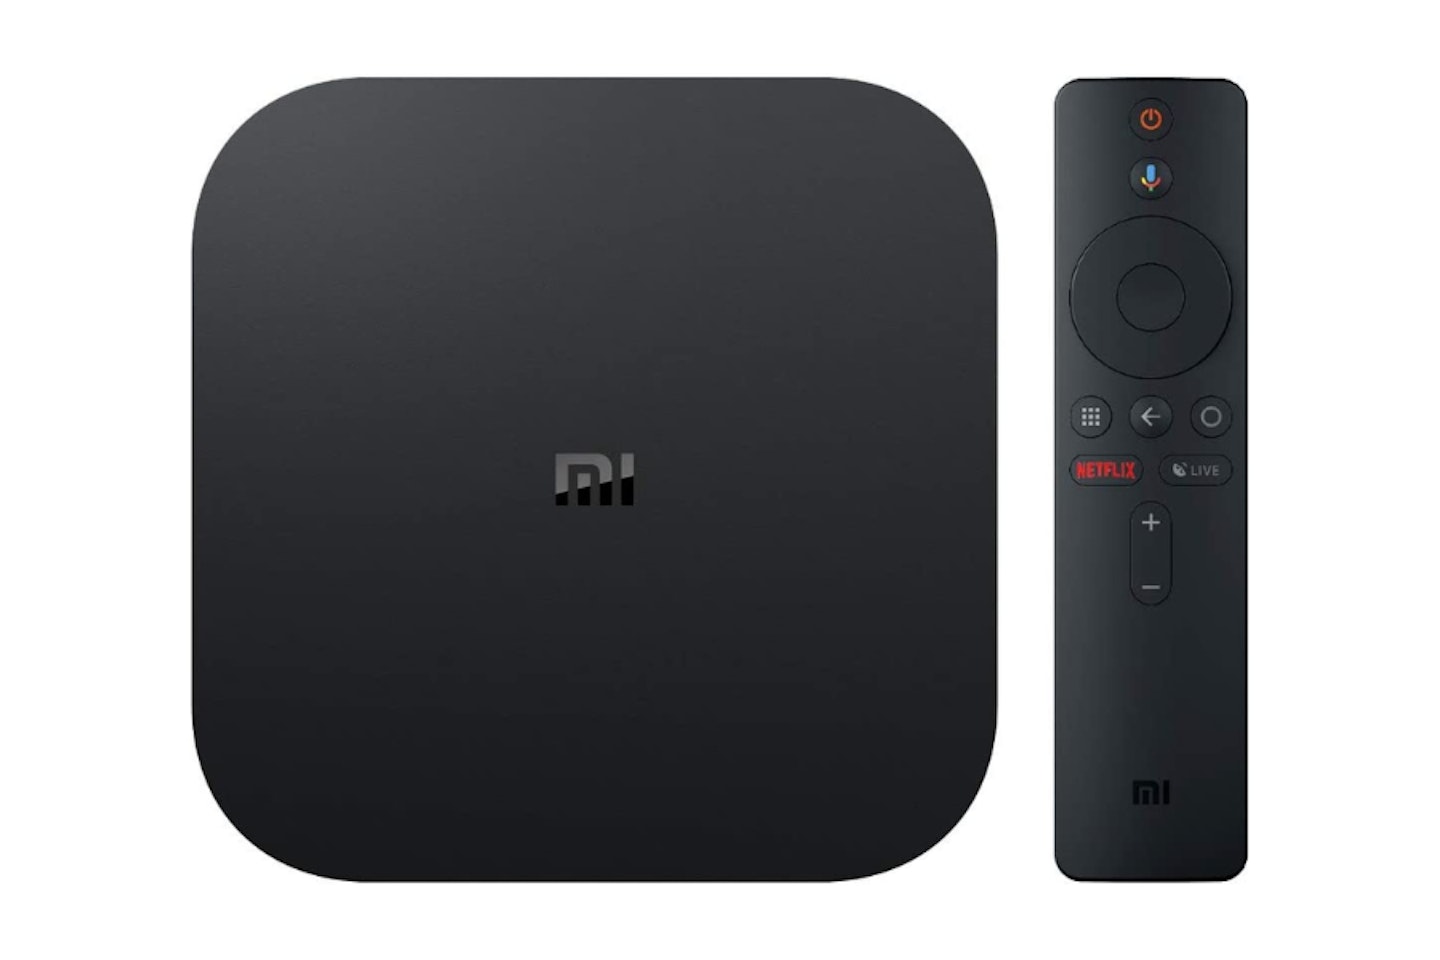 Xiaomi Mi Box S 4K Ultra HD Android TV Streaming Media Player - possibly the Best Android TV box